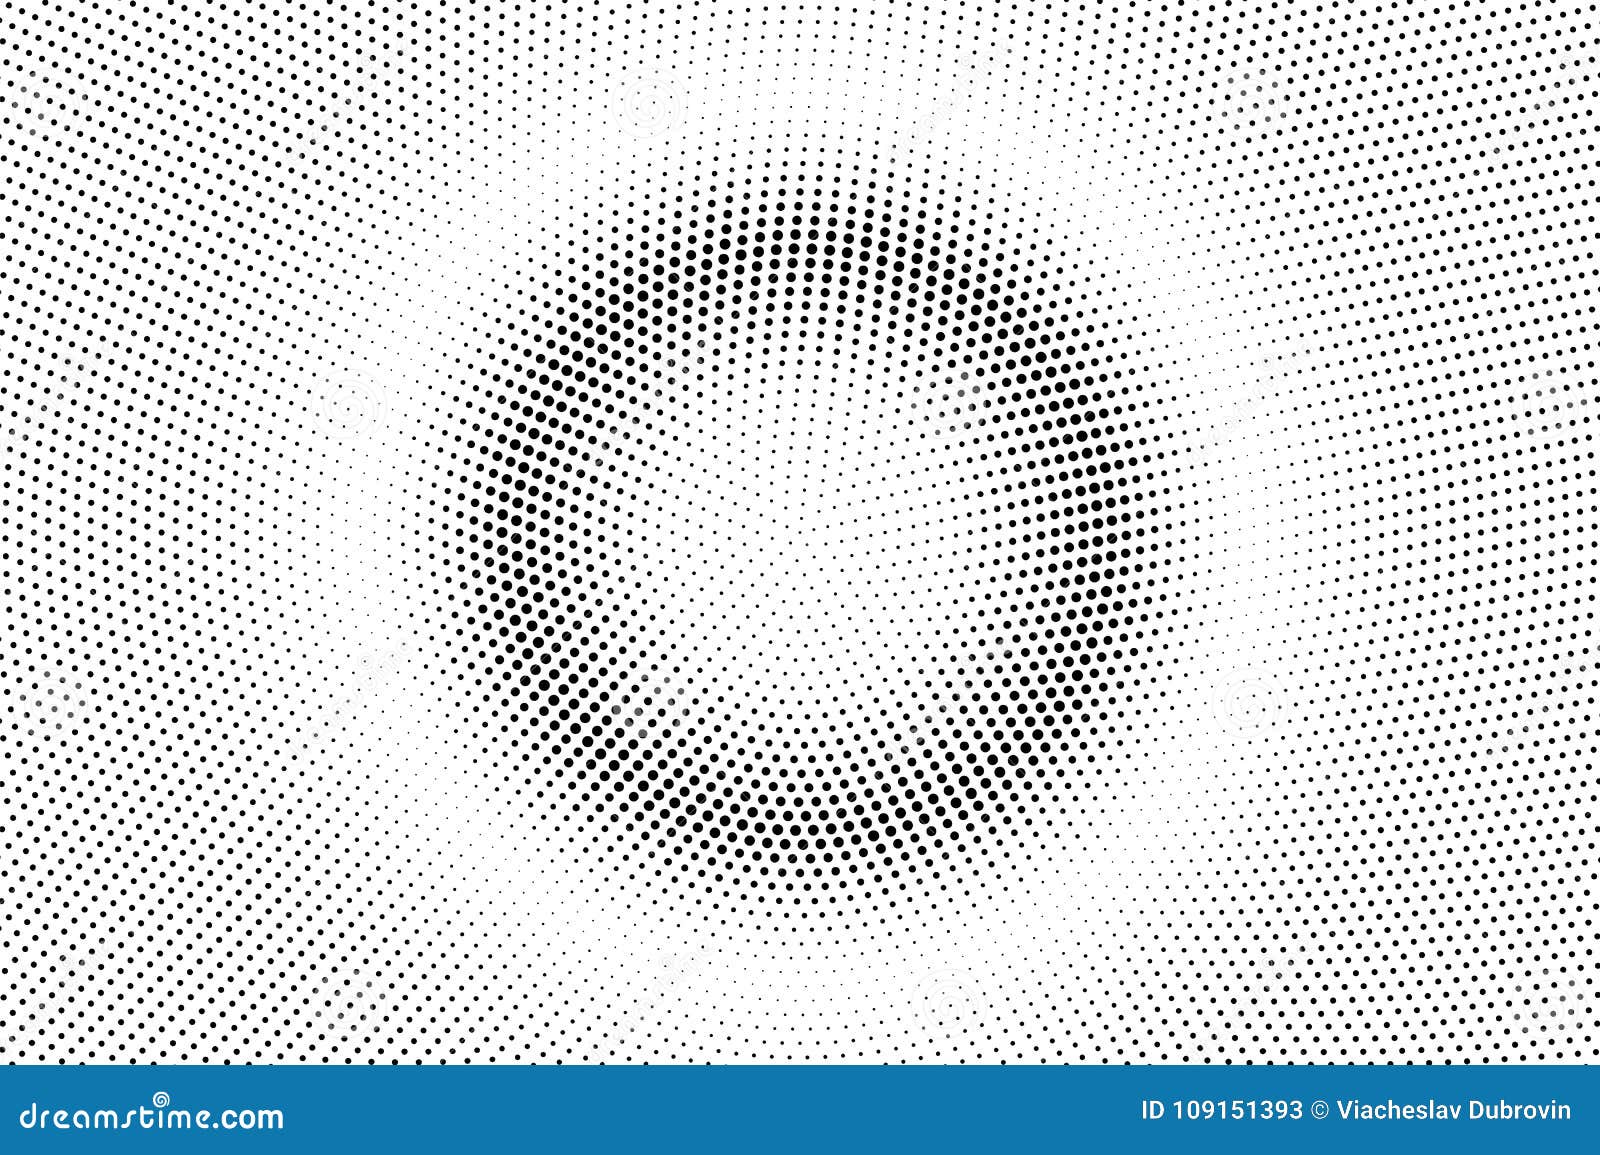 black white dotted halftone. half tone  background. centered smooth dotted gradient.